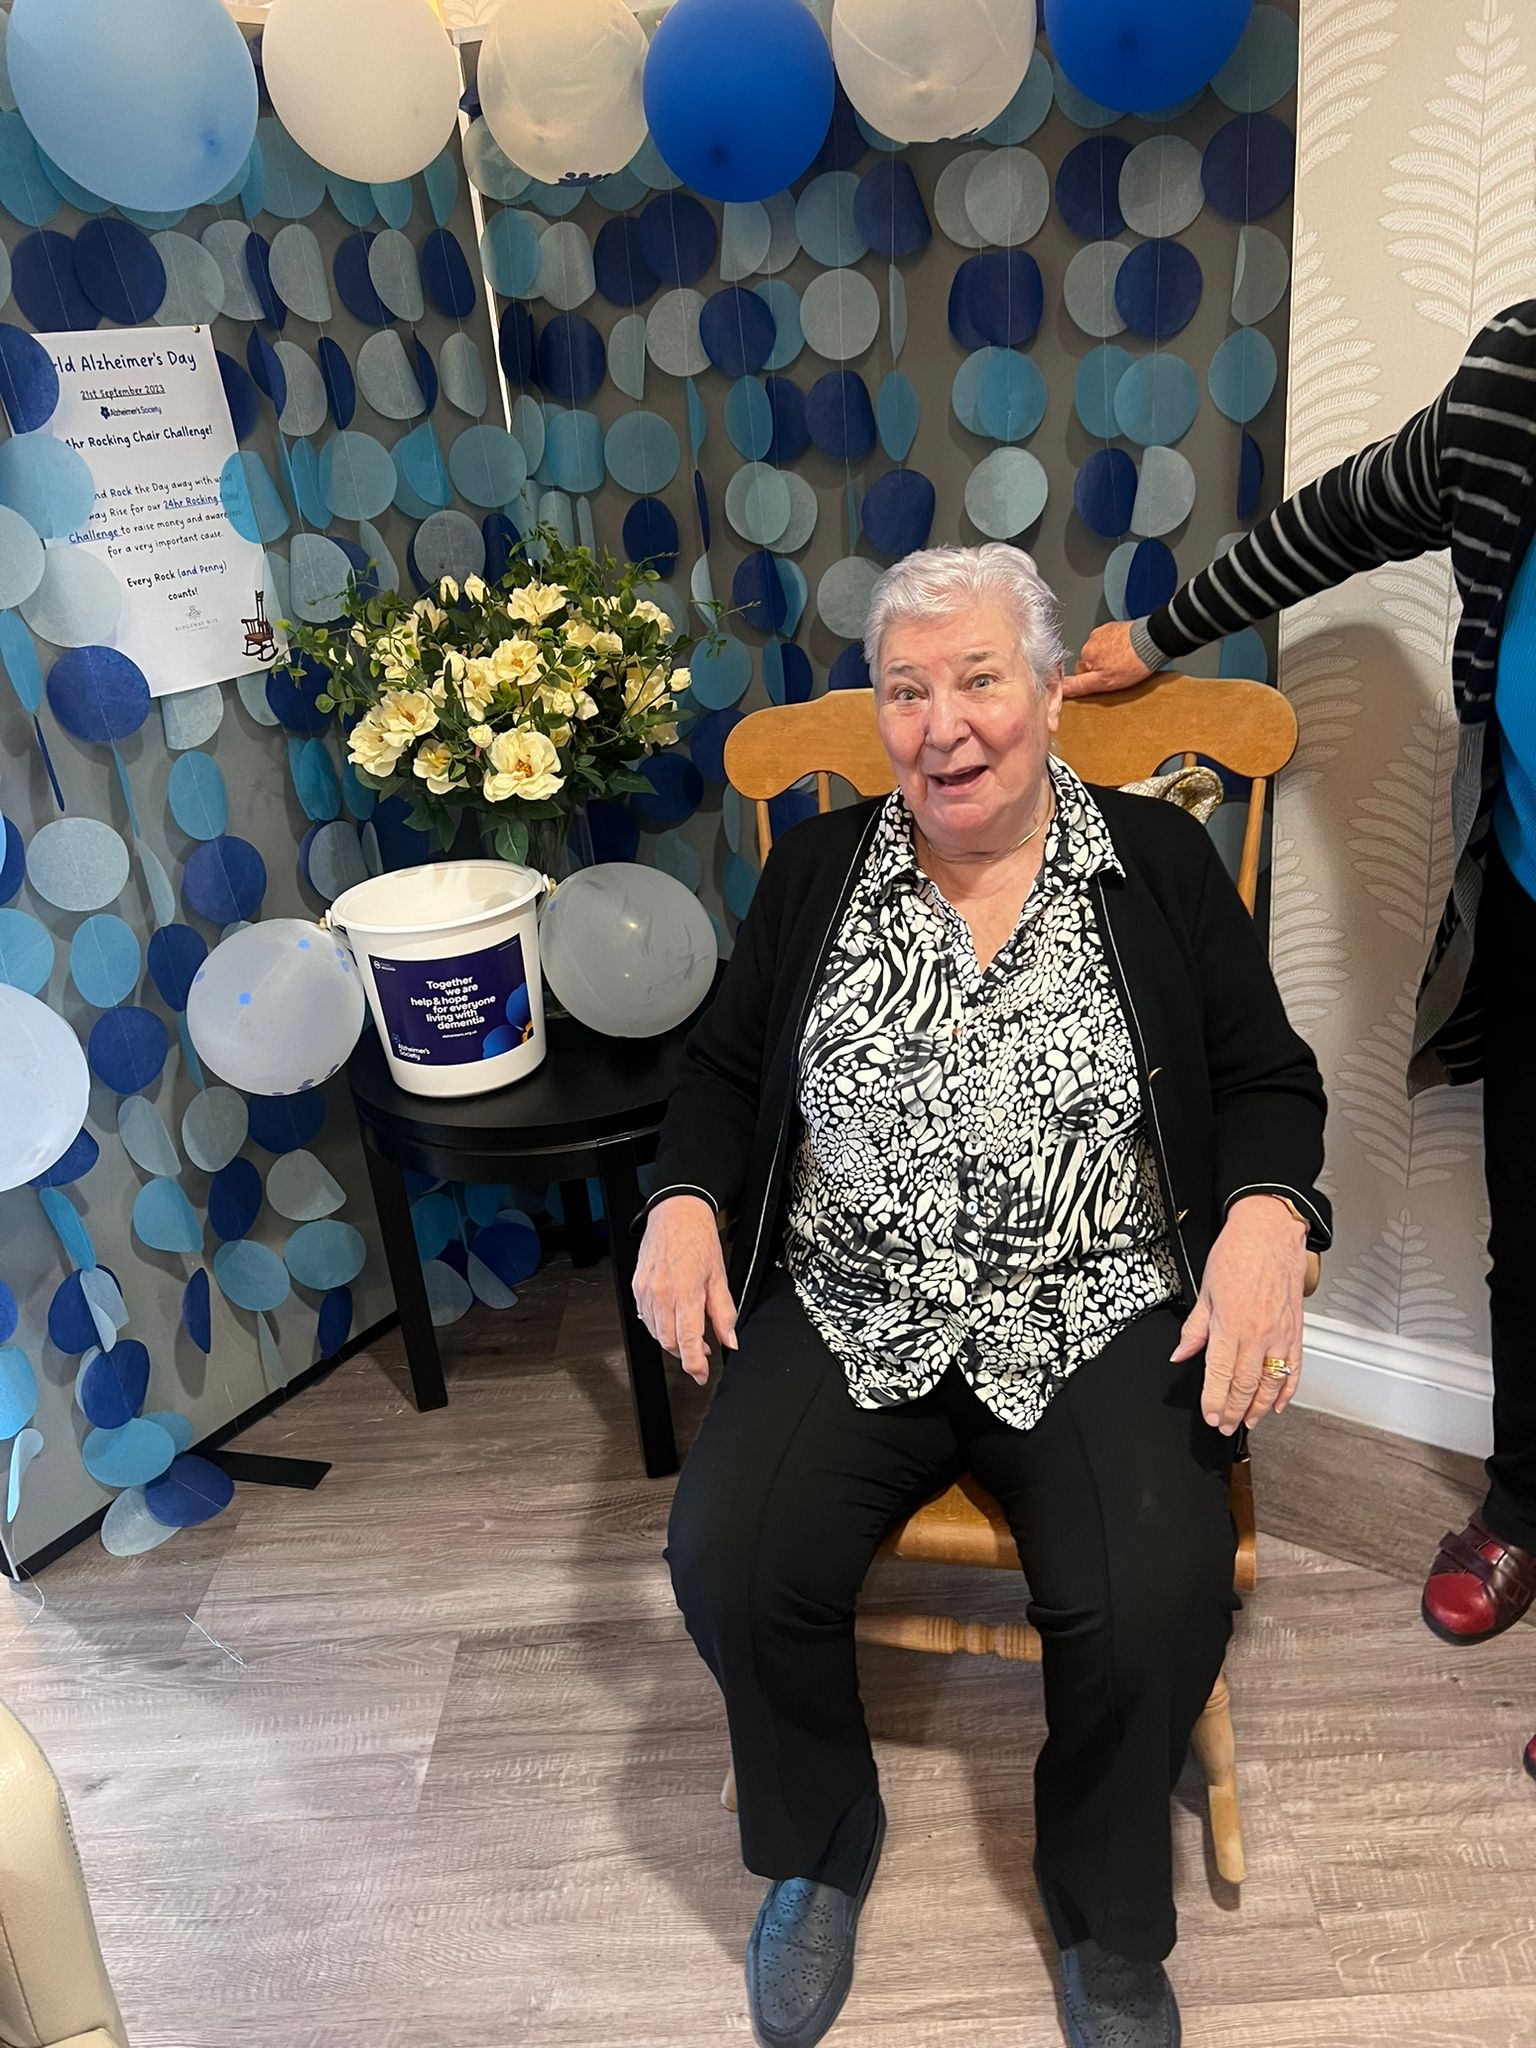 A resident sitting during a fund raiser for Alzheimer's Society